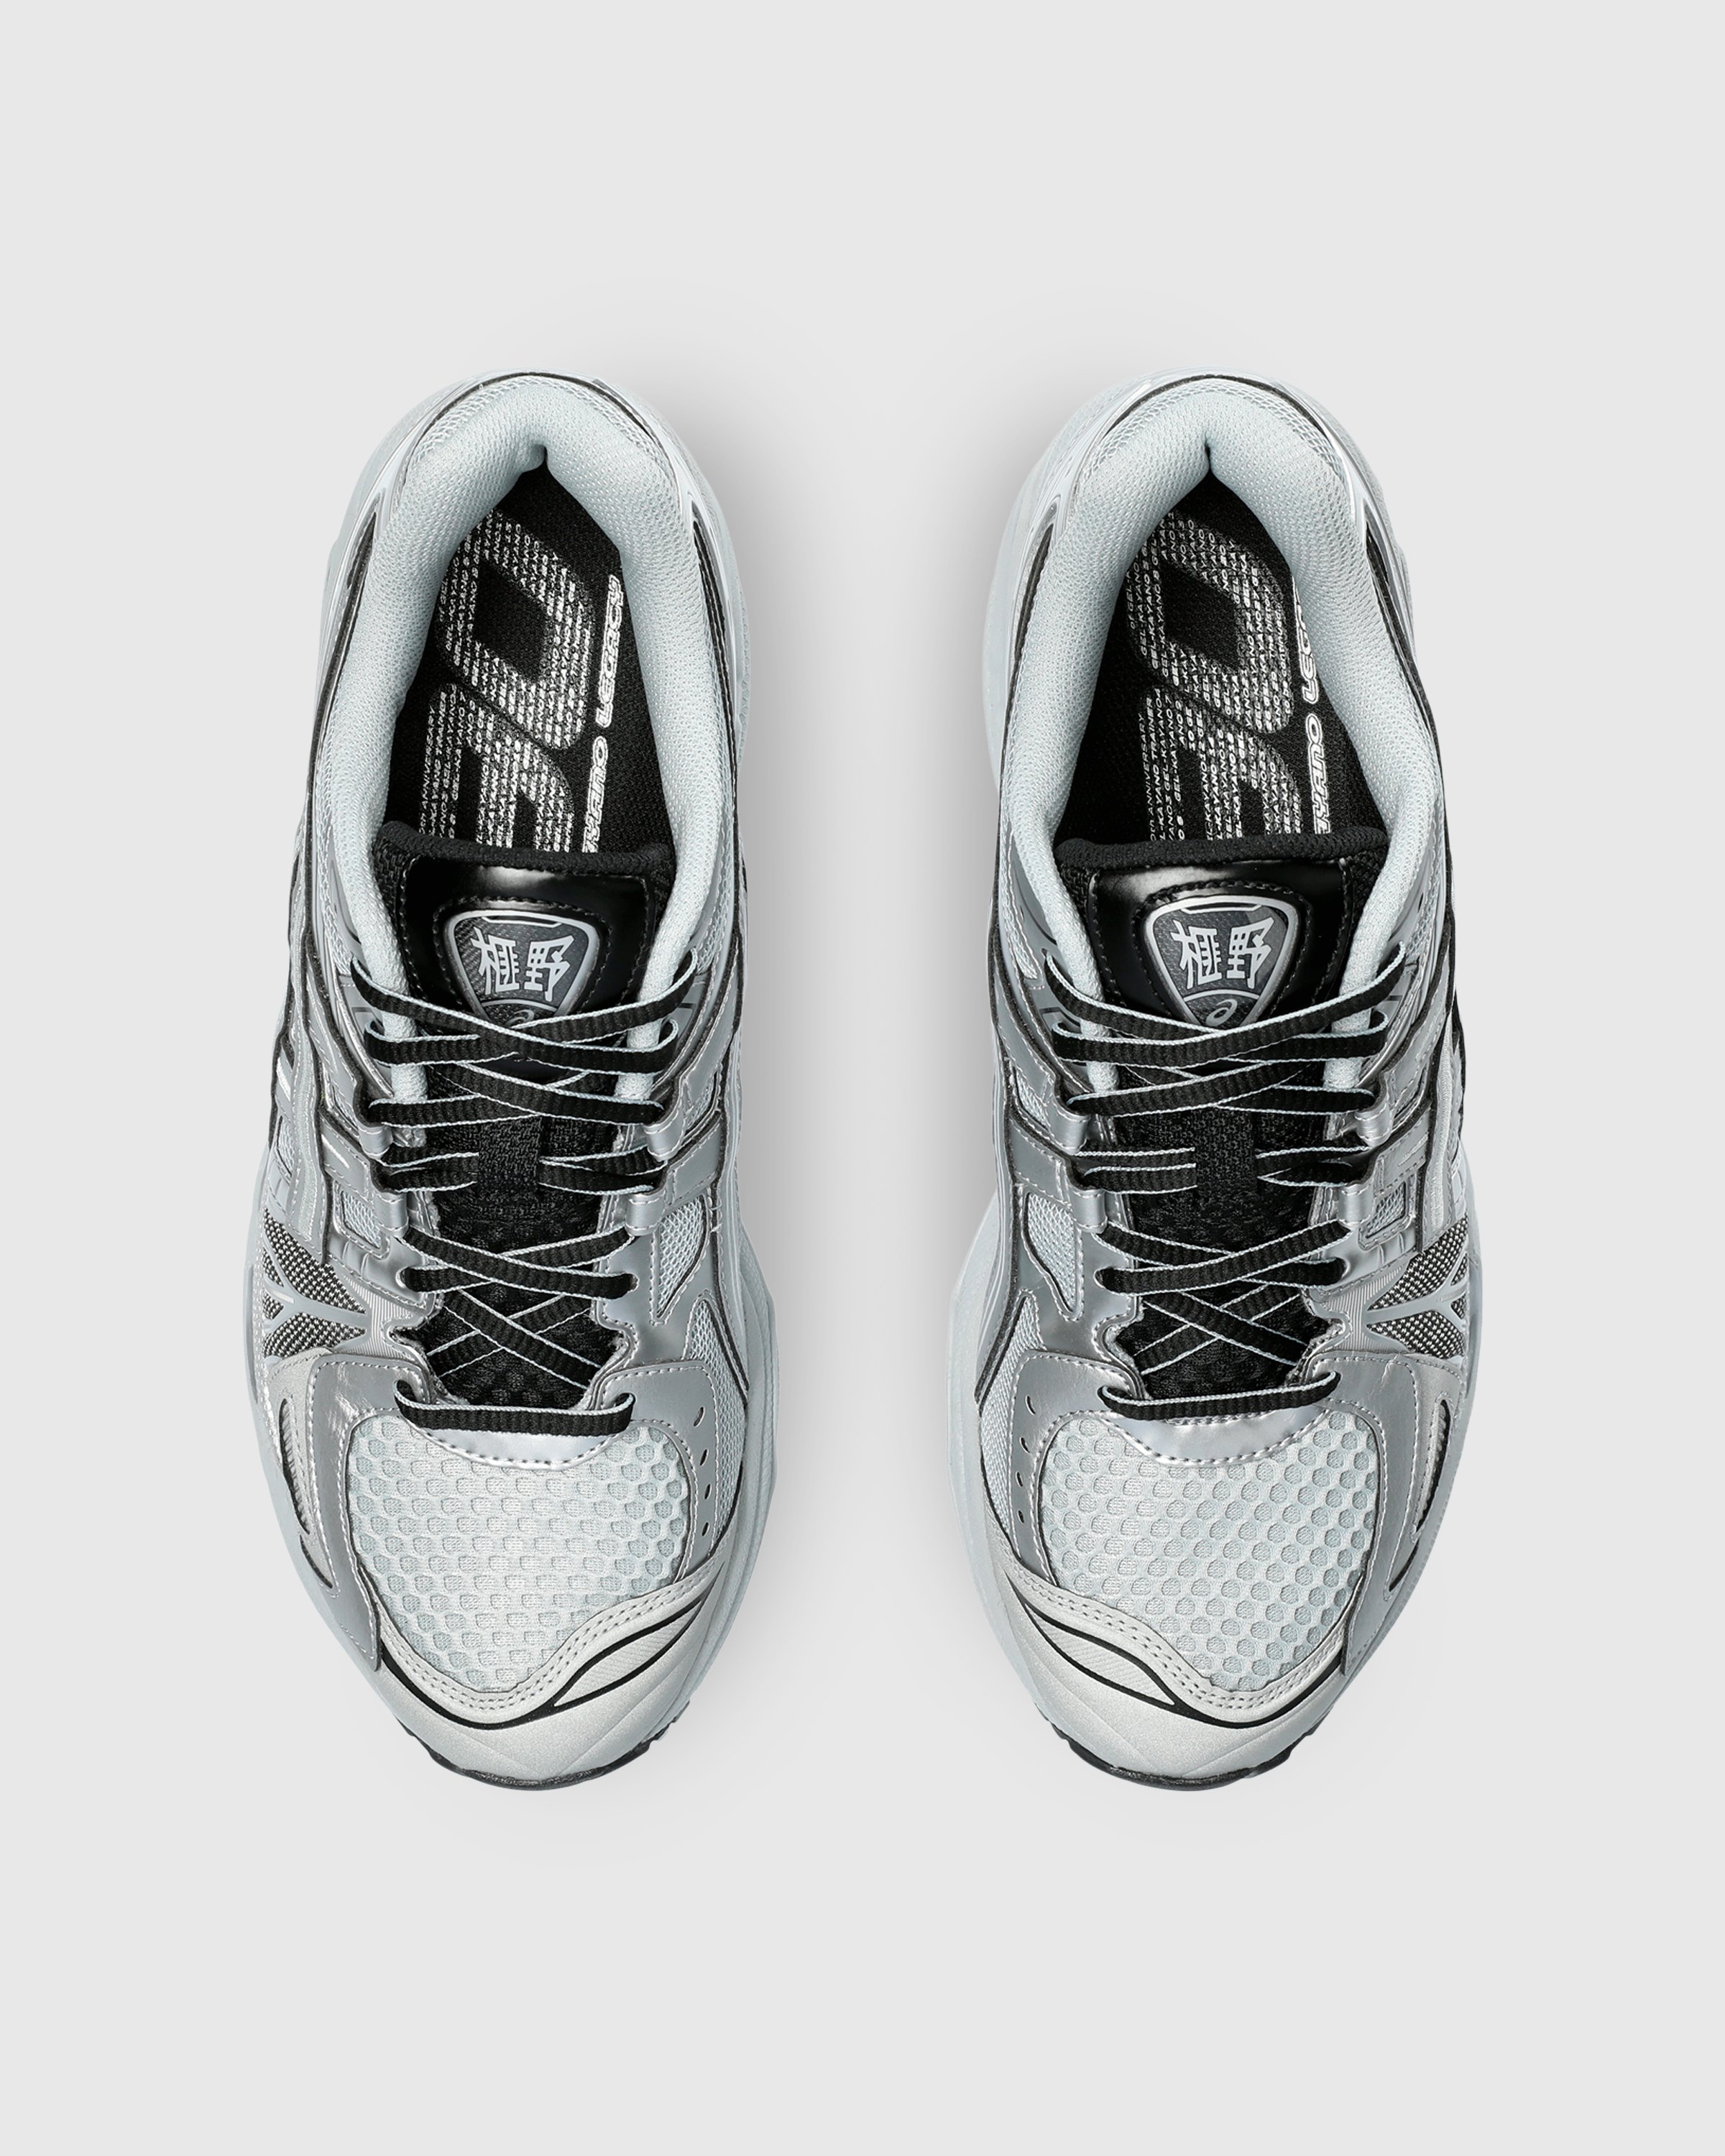 asics - GEL-KAYANO 14 Pure Silver/Pure Silver - Footwear - Silver - Image 5